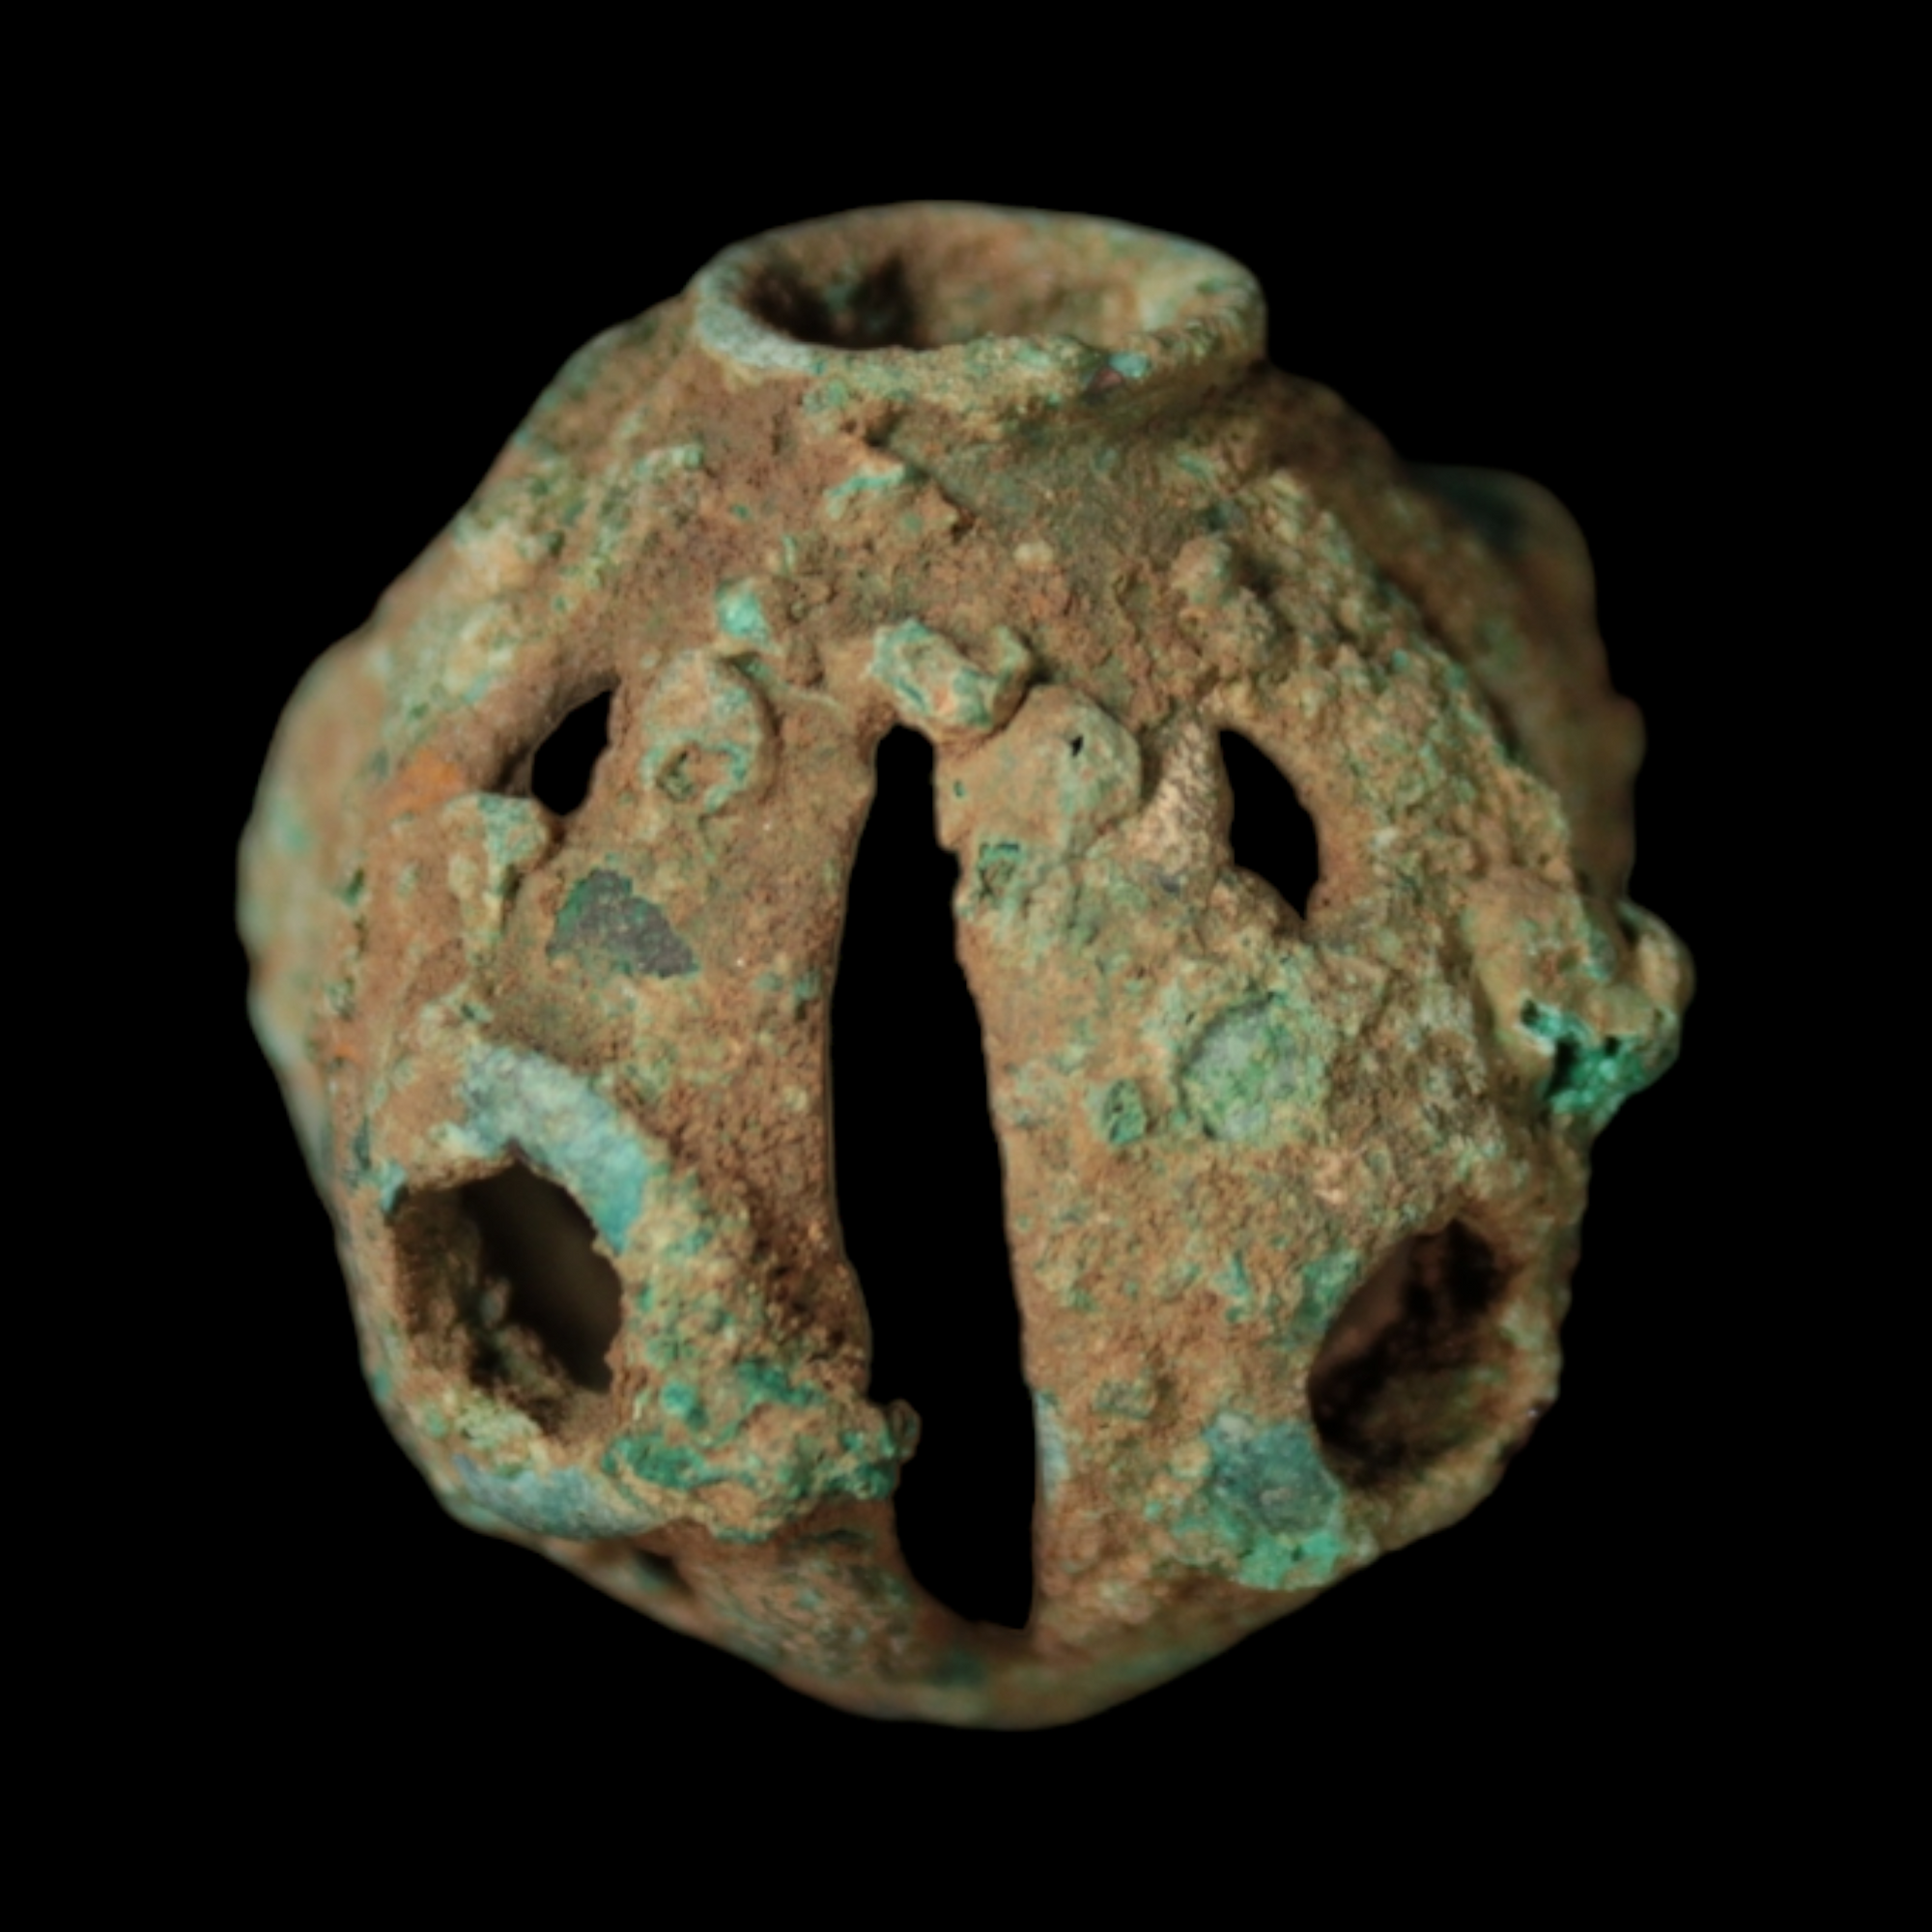 Ancient or Early Medieval Bronze Ornament, #2 - c. 800 BCE to 1000 CE - Central/Eastern Europe - 3/8/23 Auction